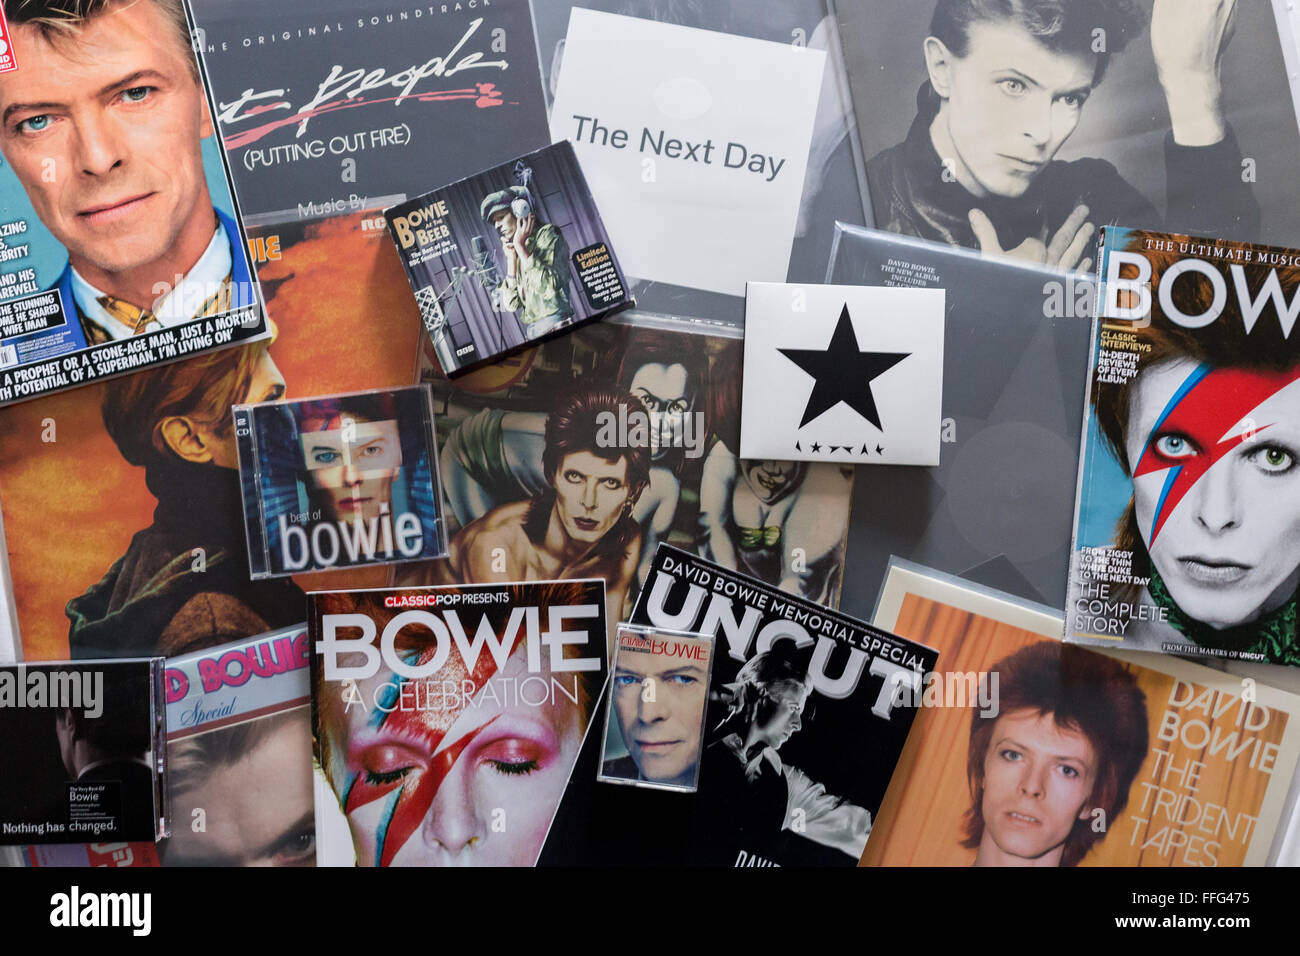 David Bowie - Collection of albums,vinyl,cd's magazines and memorabilia featuring David Bowie's image Stock Photo